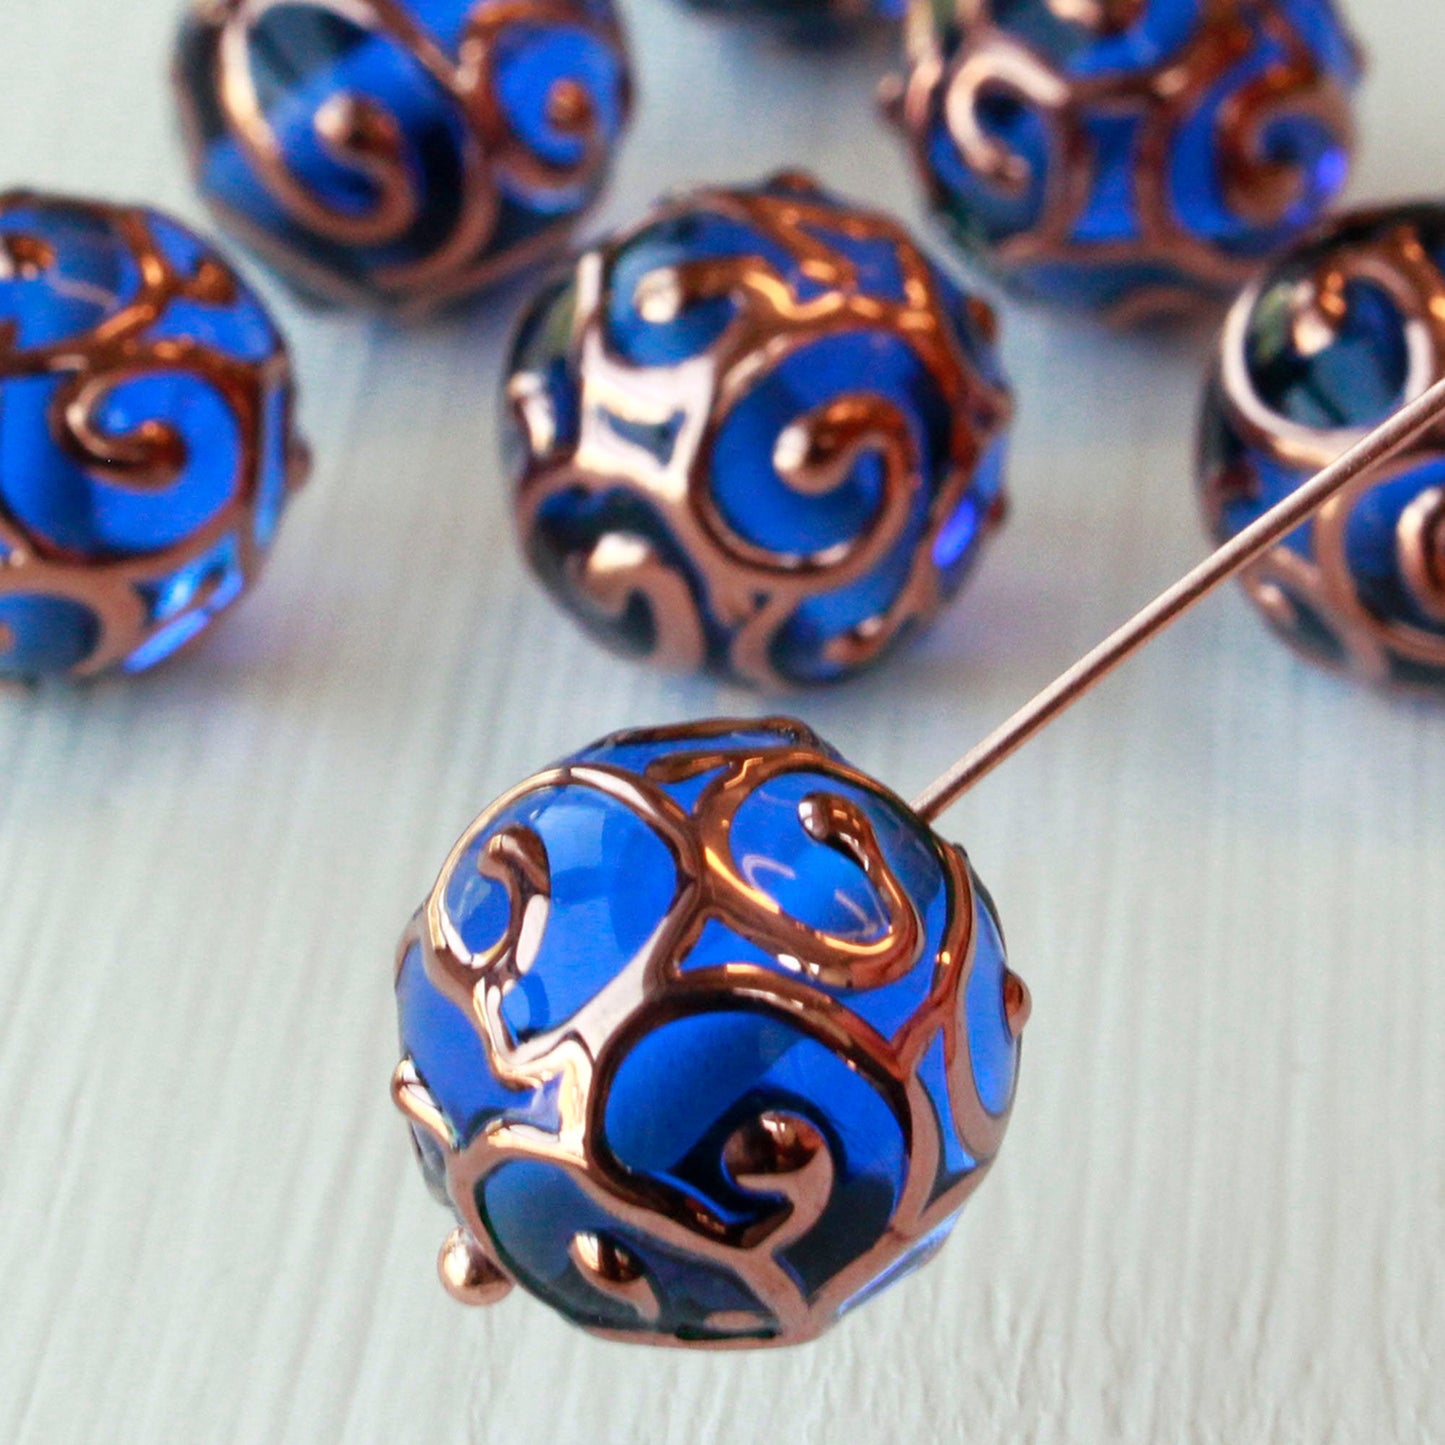 14mm Round Lampwork Beads - Sapphire Blue - 2, 4 or 8